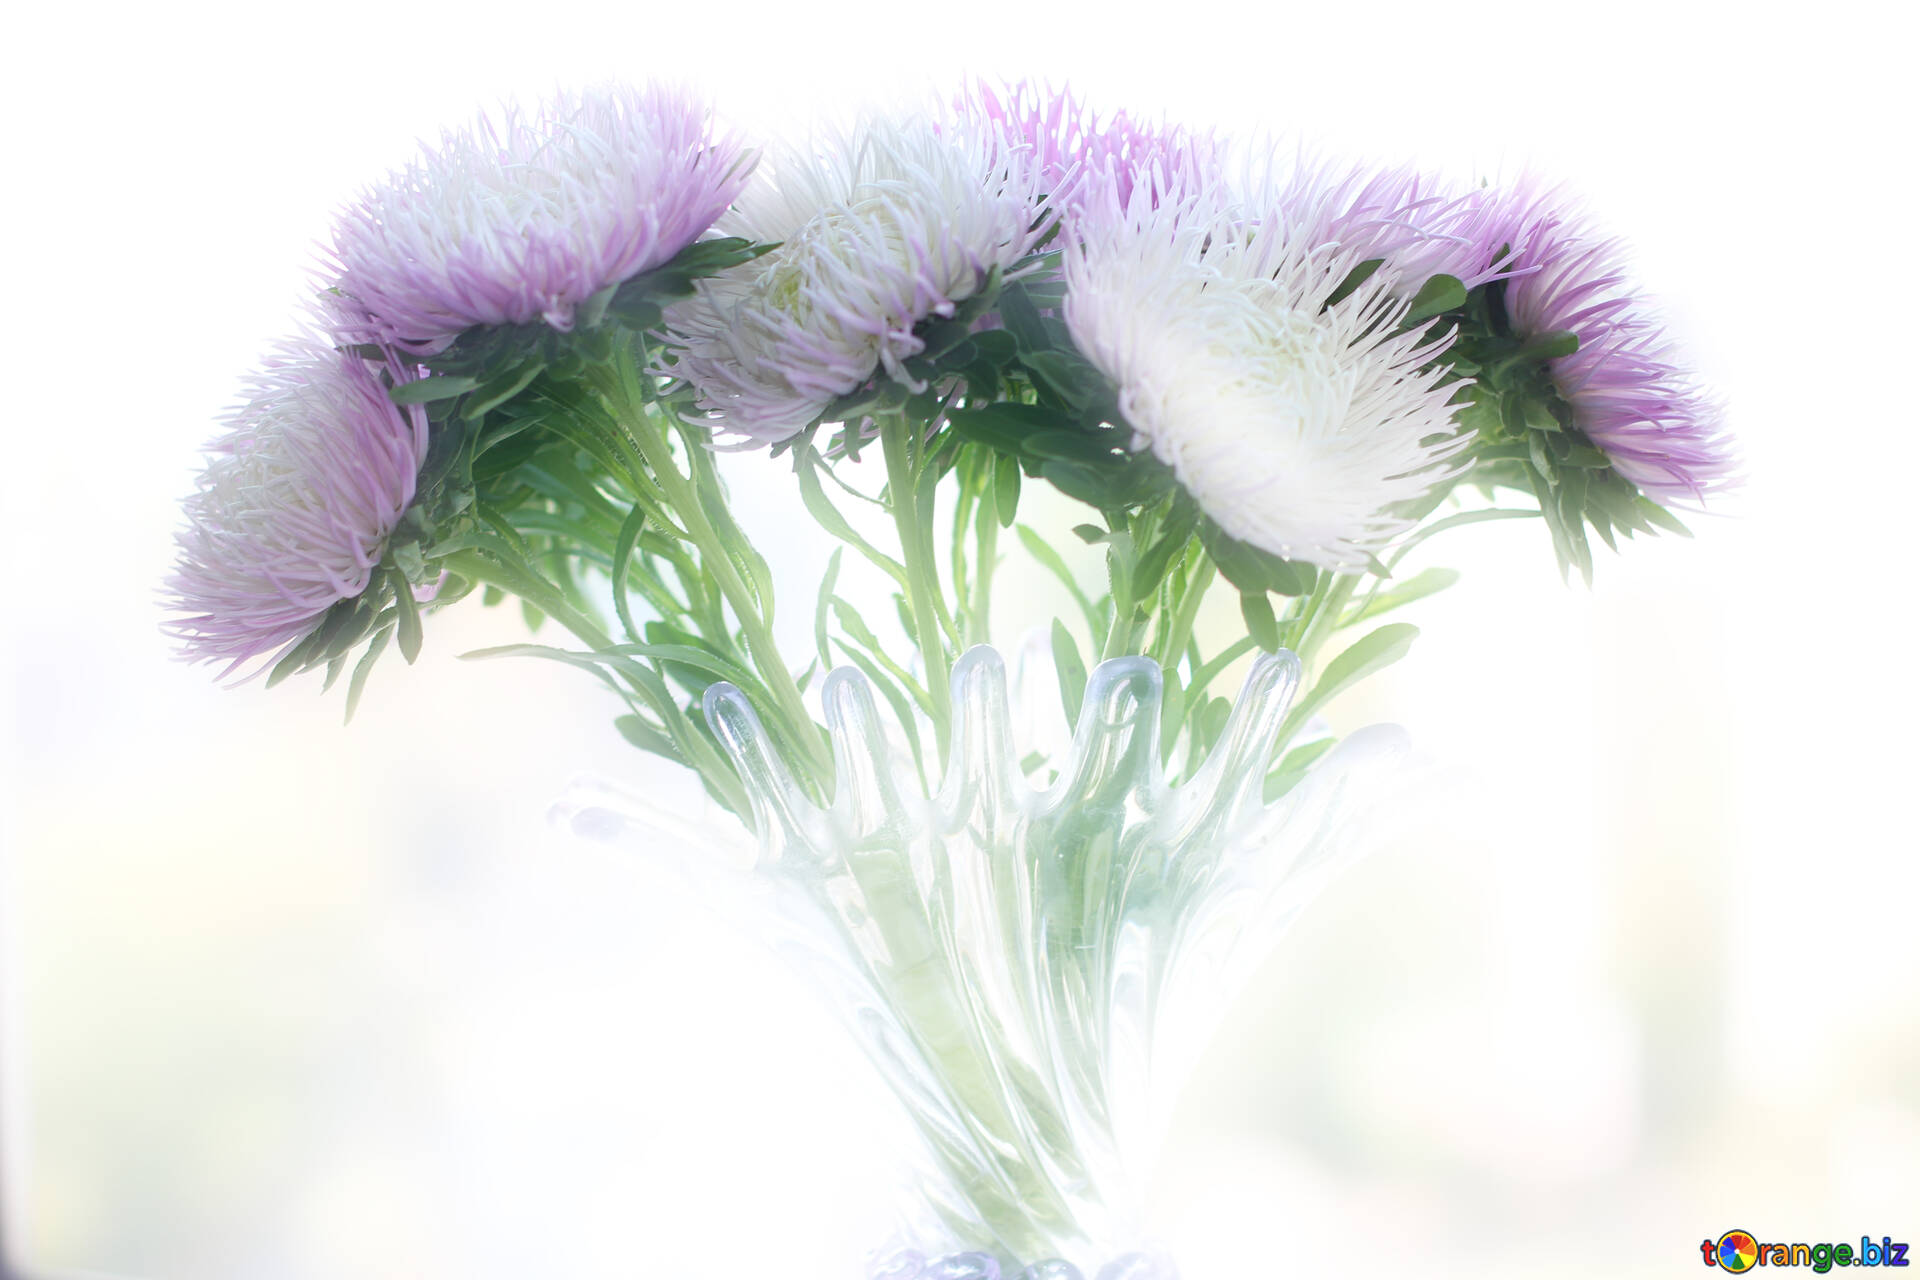 Flowers Asters Light Background With Asters Glass 39602